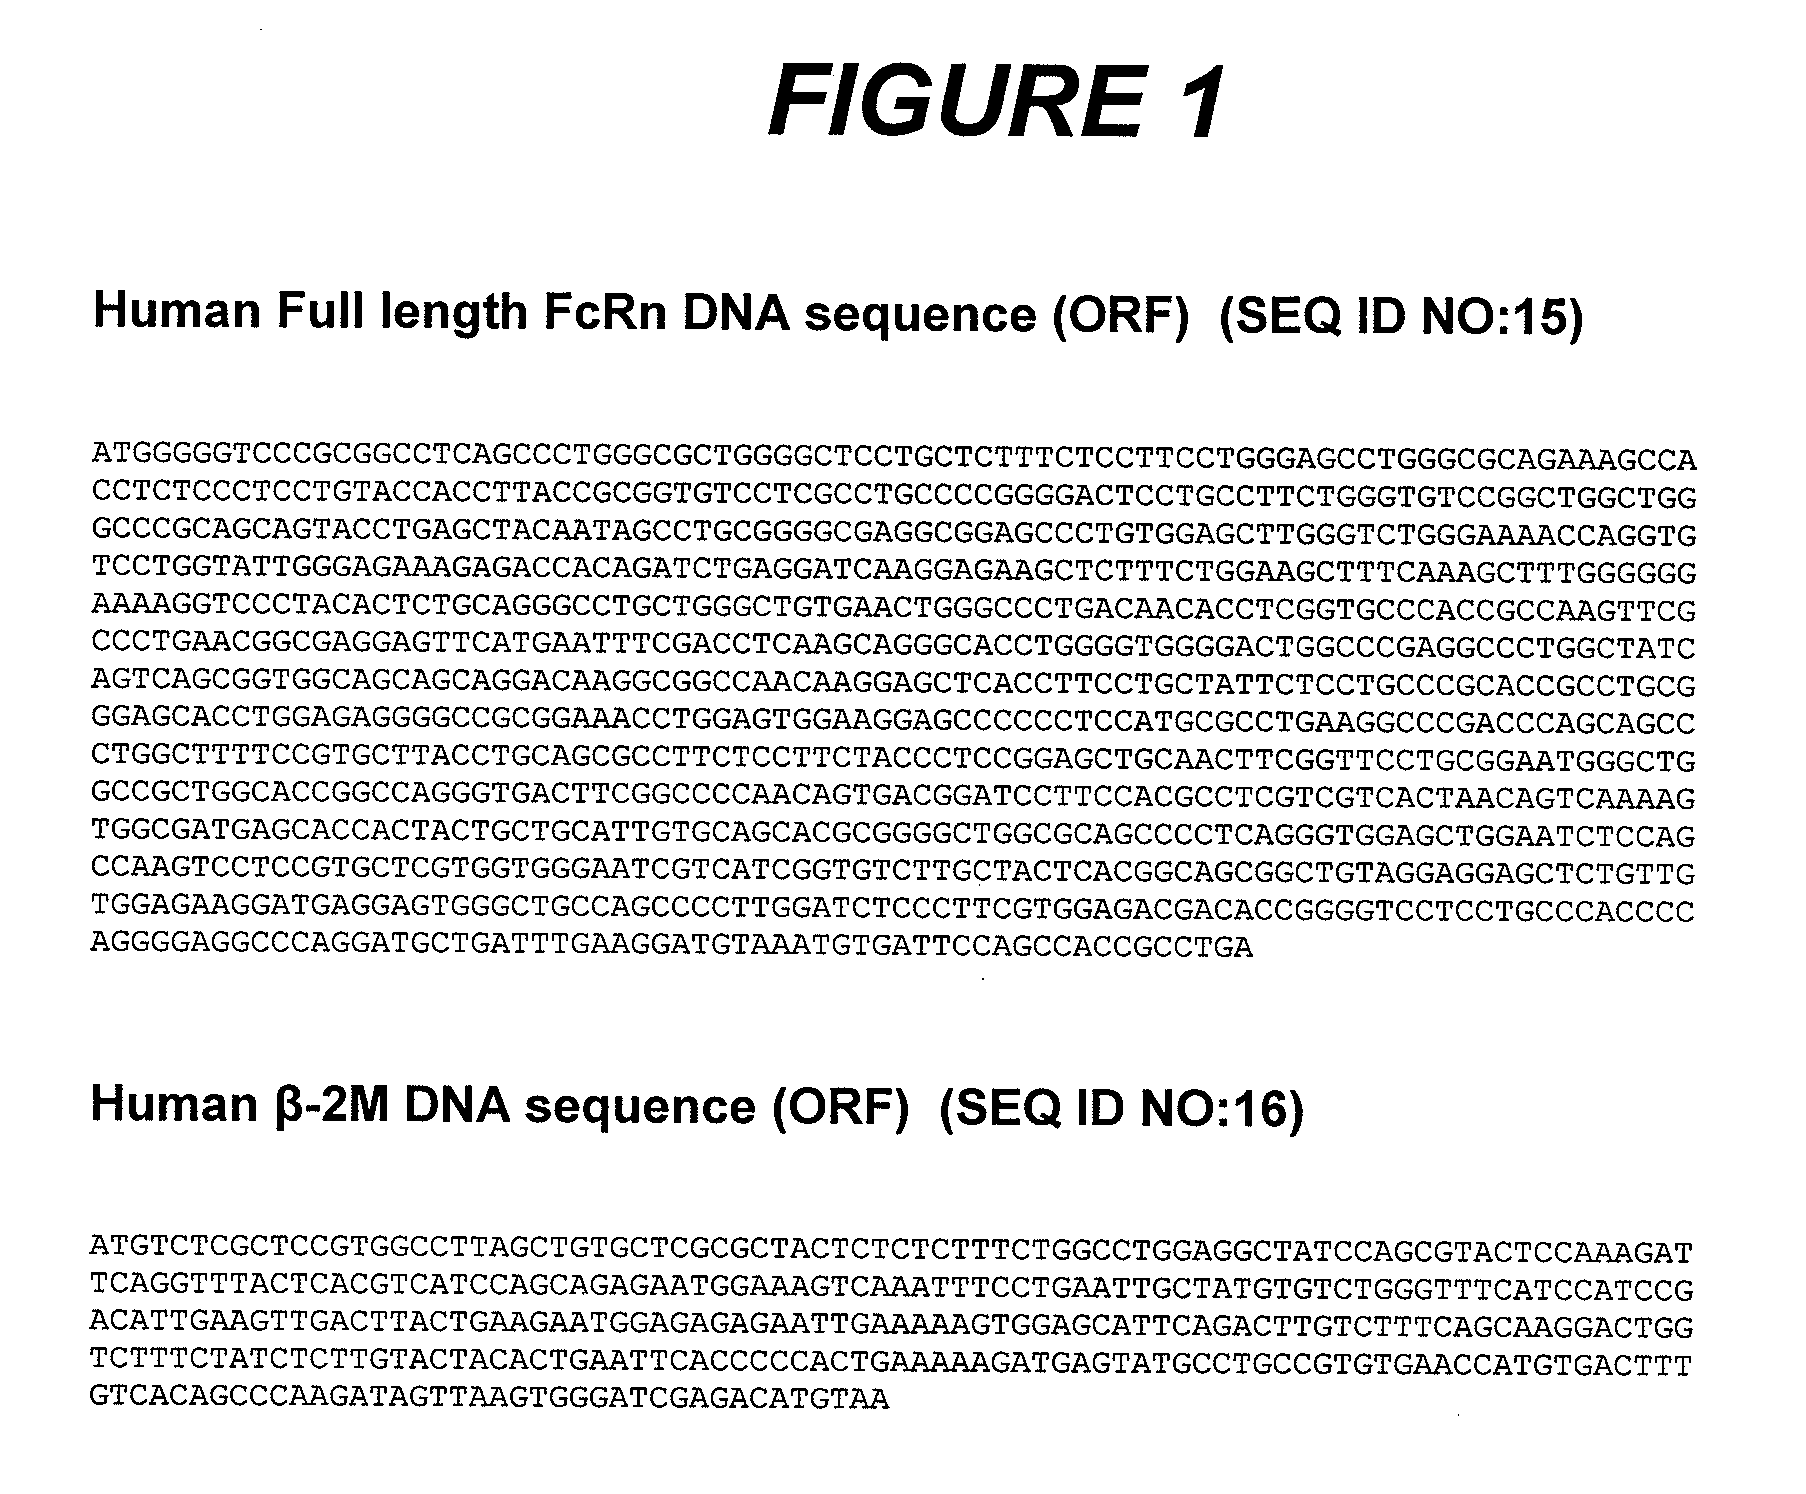 PEPTIDES THAT BLOCK THE BINDING OF IgG TO FcRn